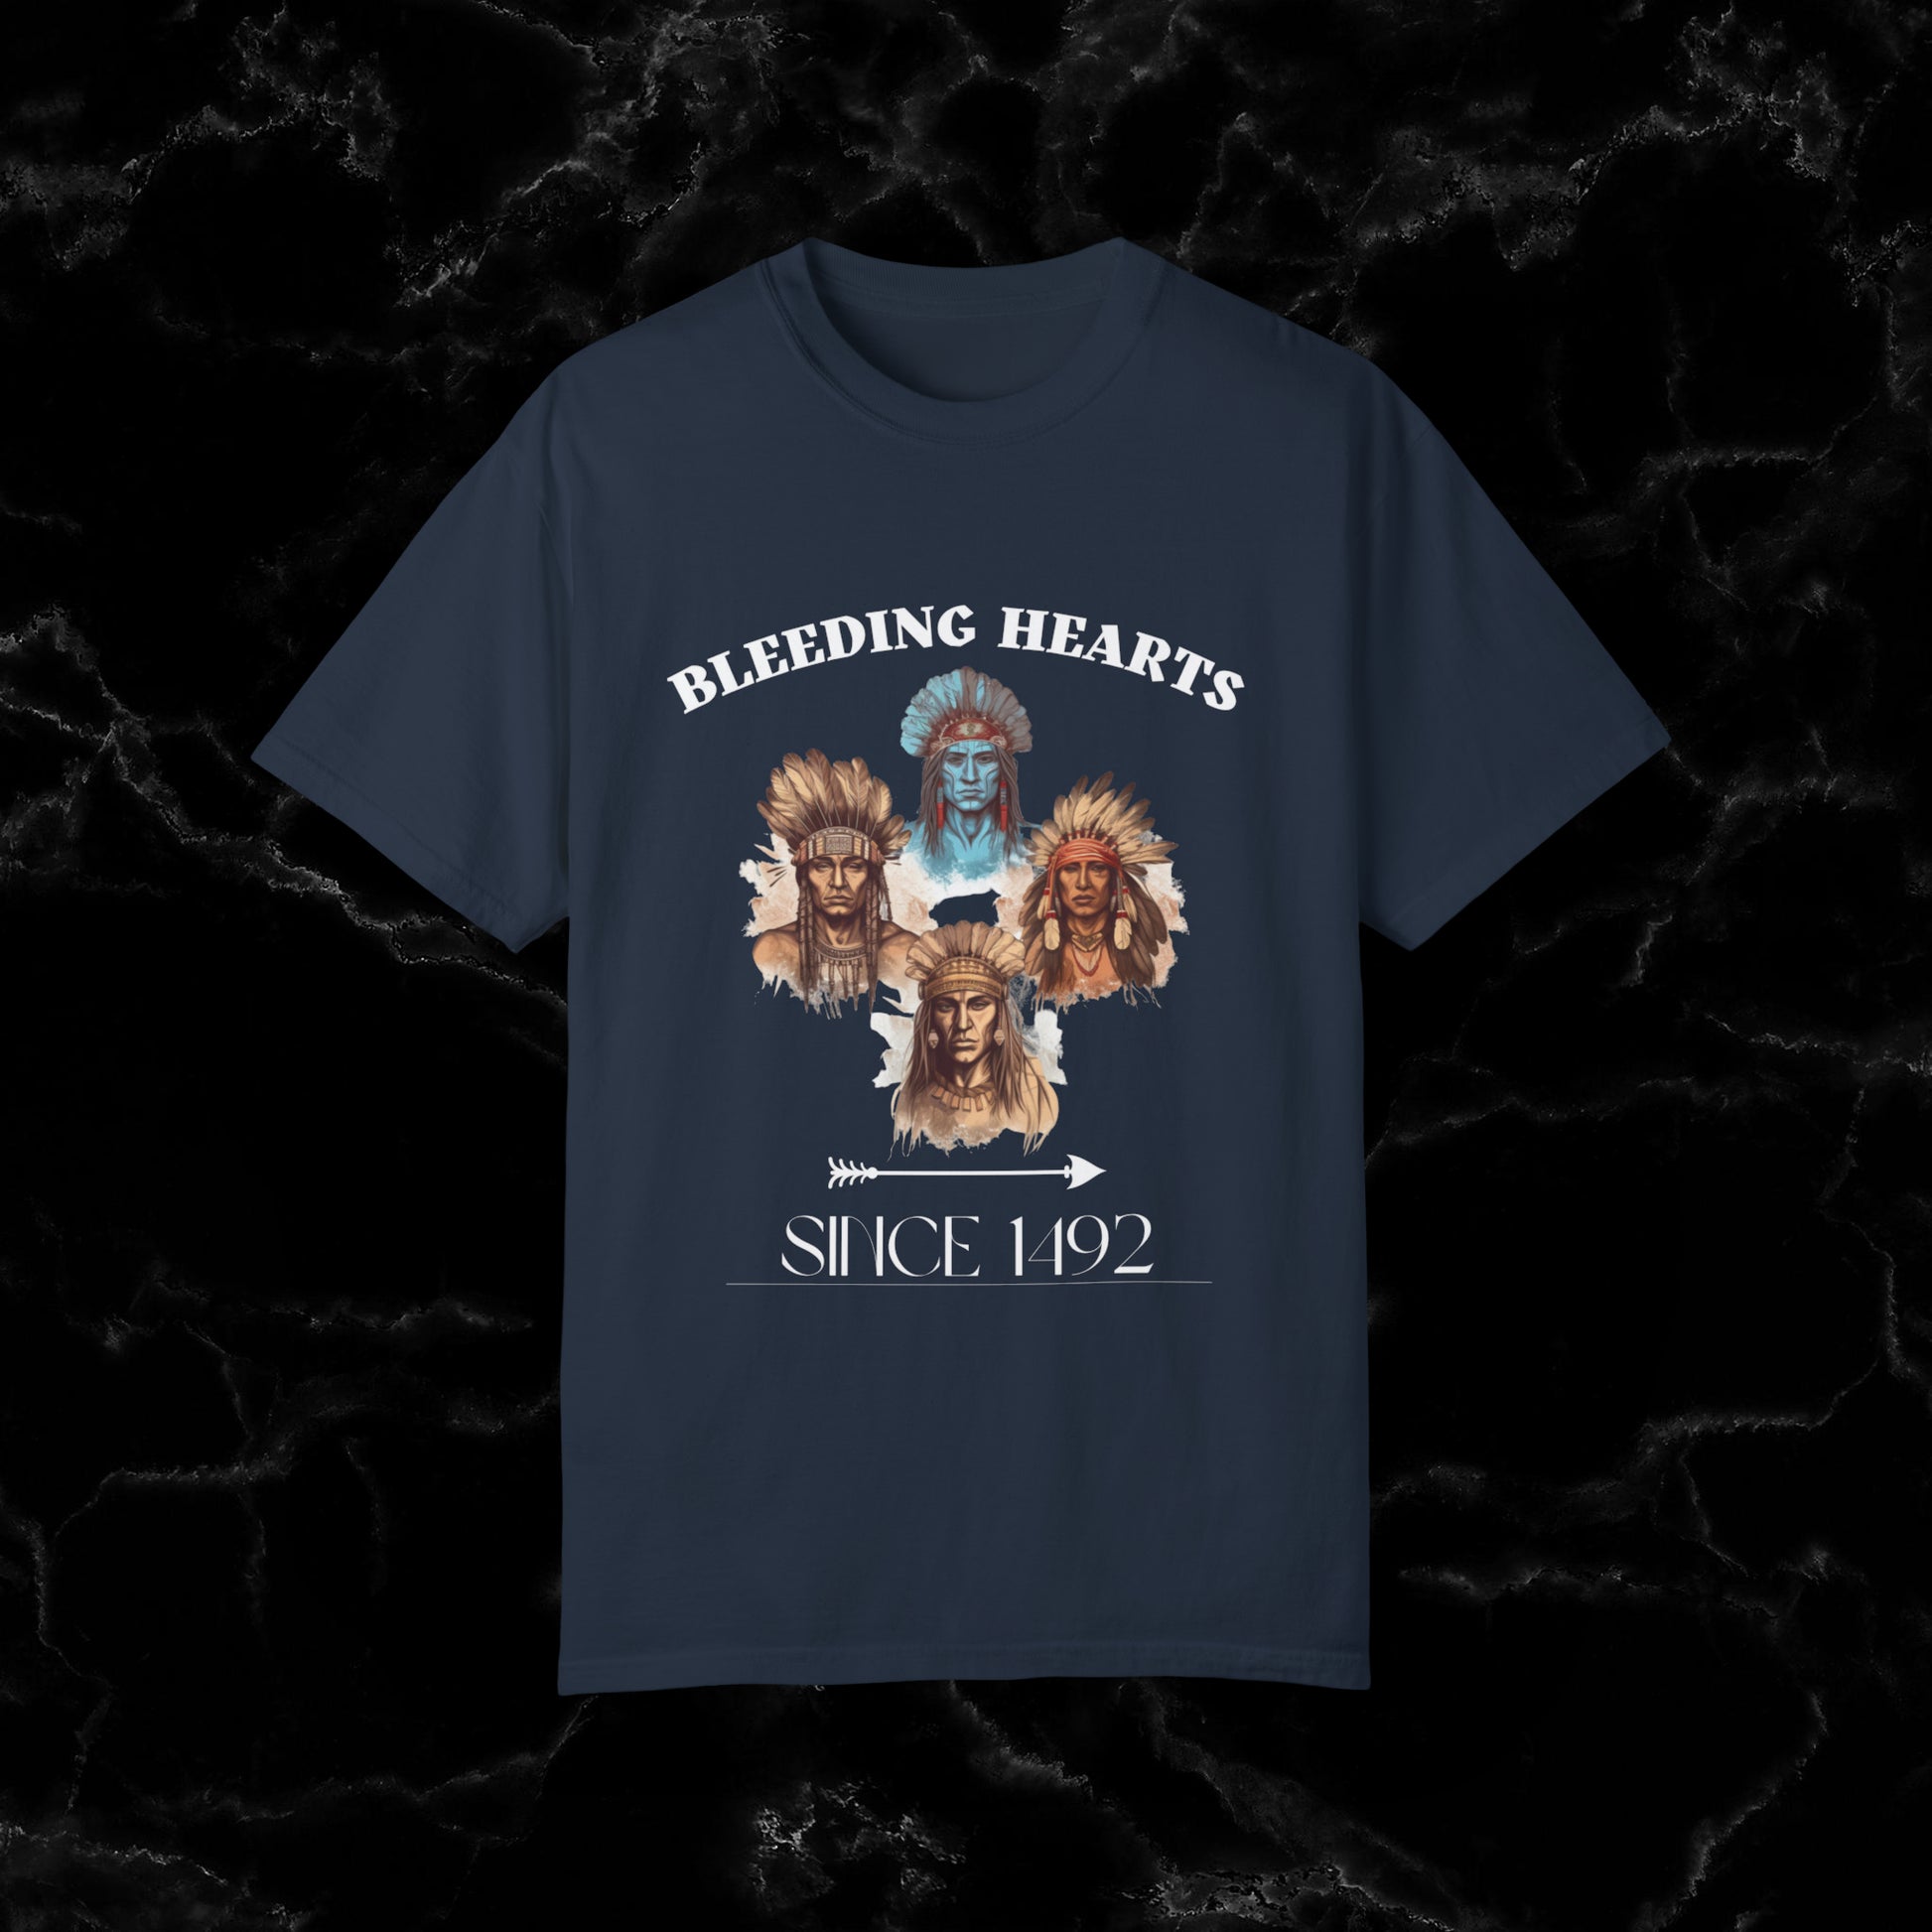 Native American Comfort Colors Shirt - Authentic Tribal Design, Nature-Inspired Apparel, 'Bleeding Hearts since 1492 T-Shirt Navy S 